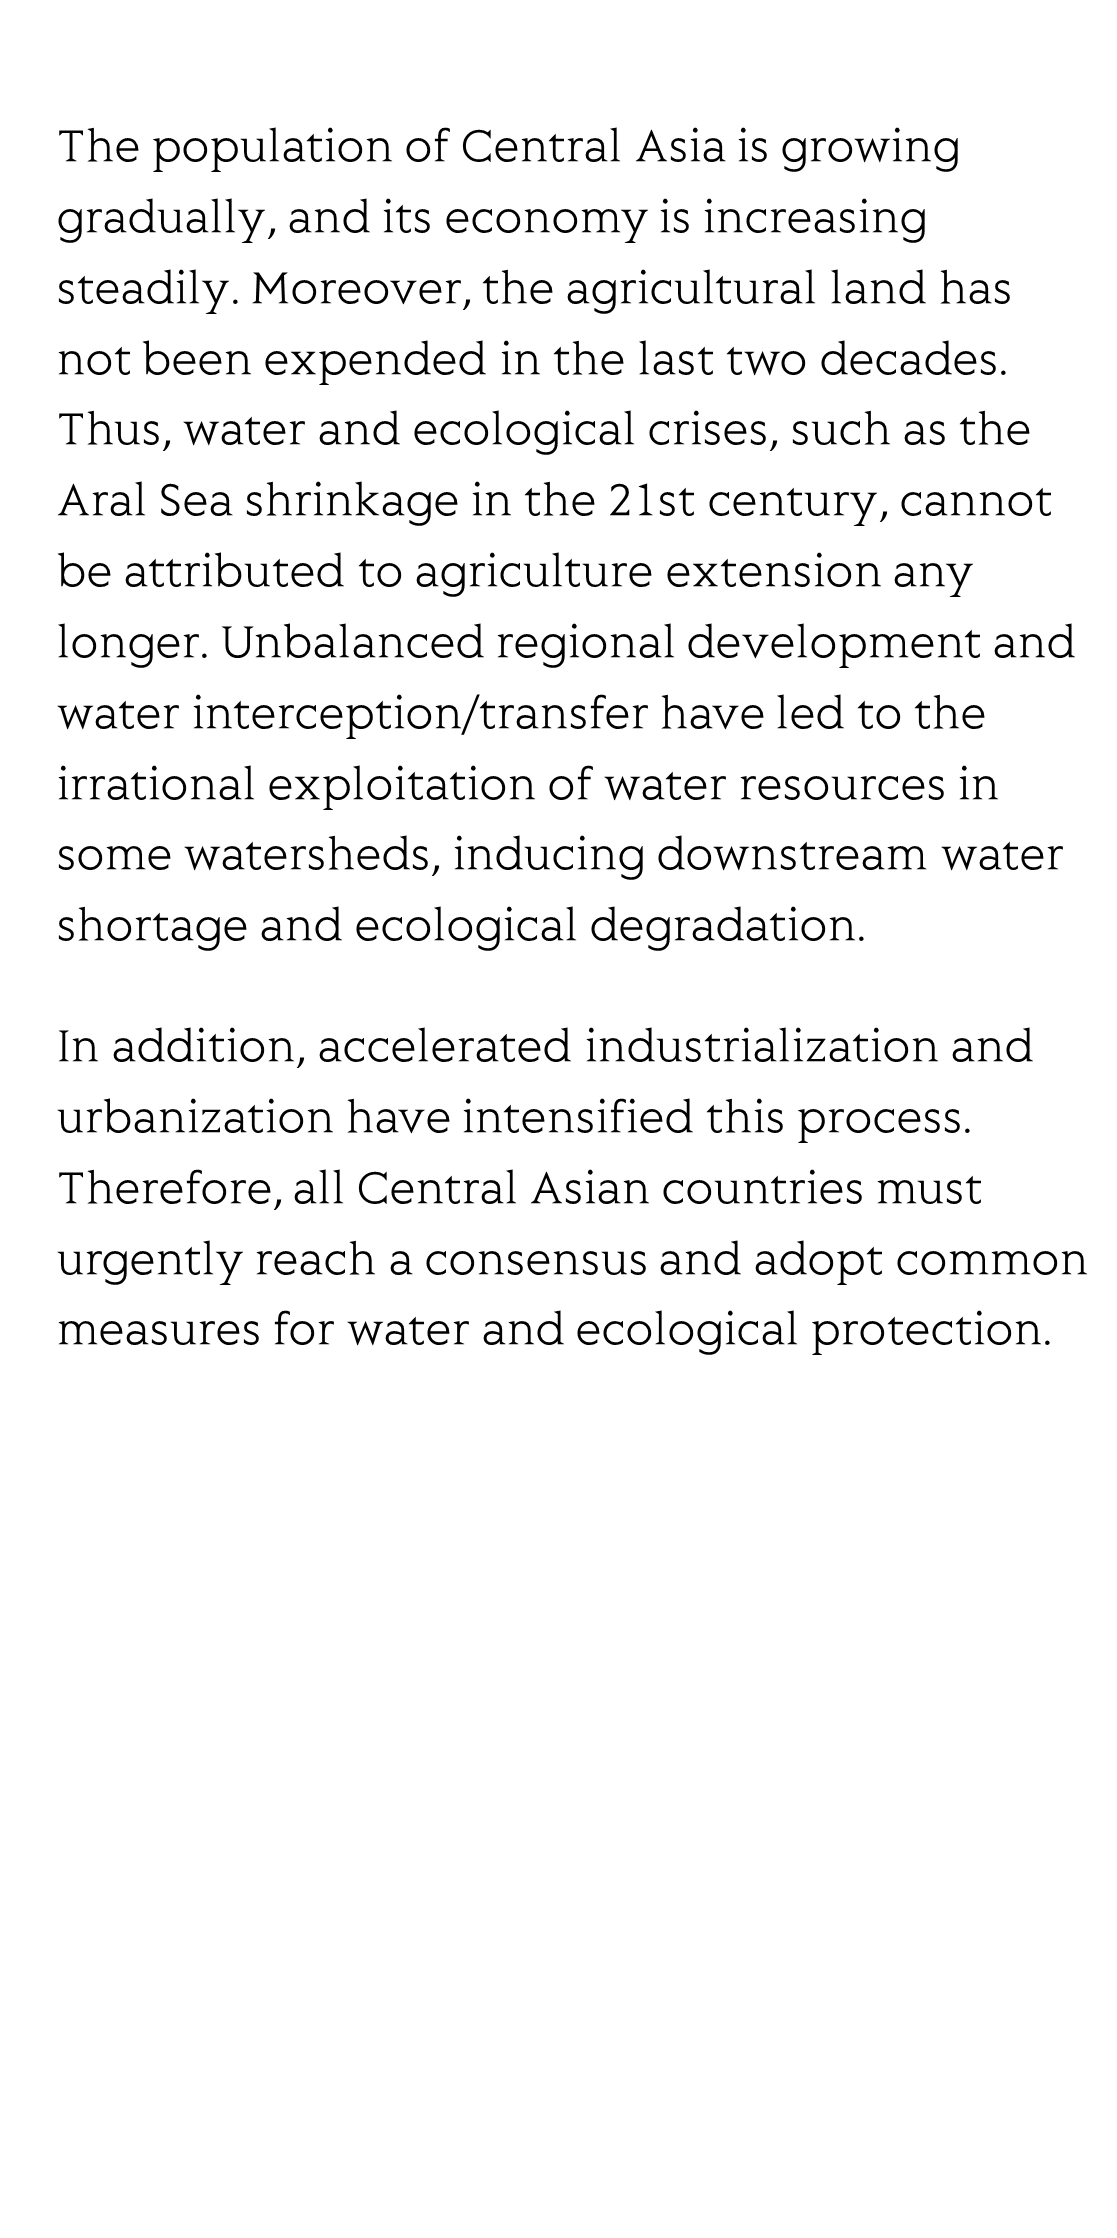 Spatiotemporal changes in water, land use, and ecosystem services in Central Asia considering climate changes and human activities_3